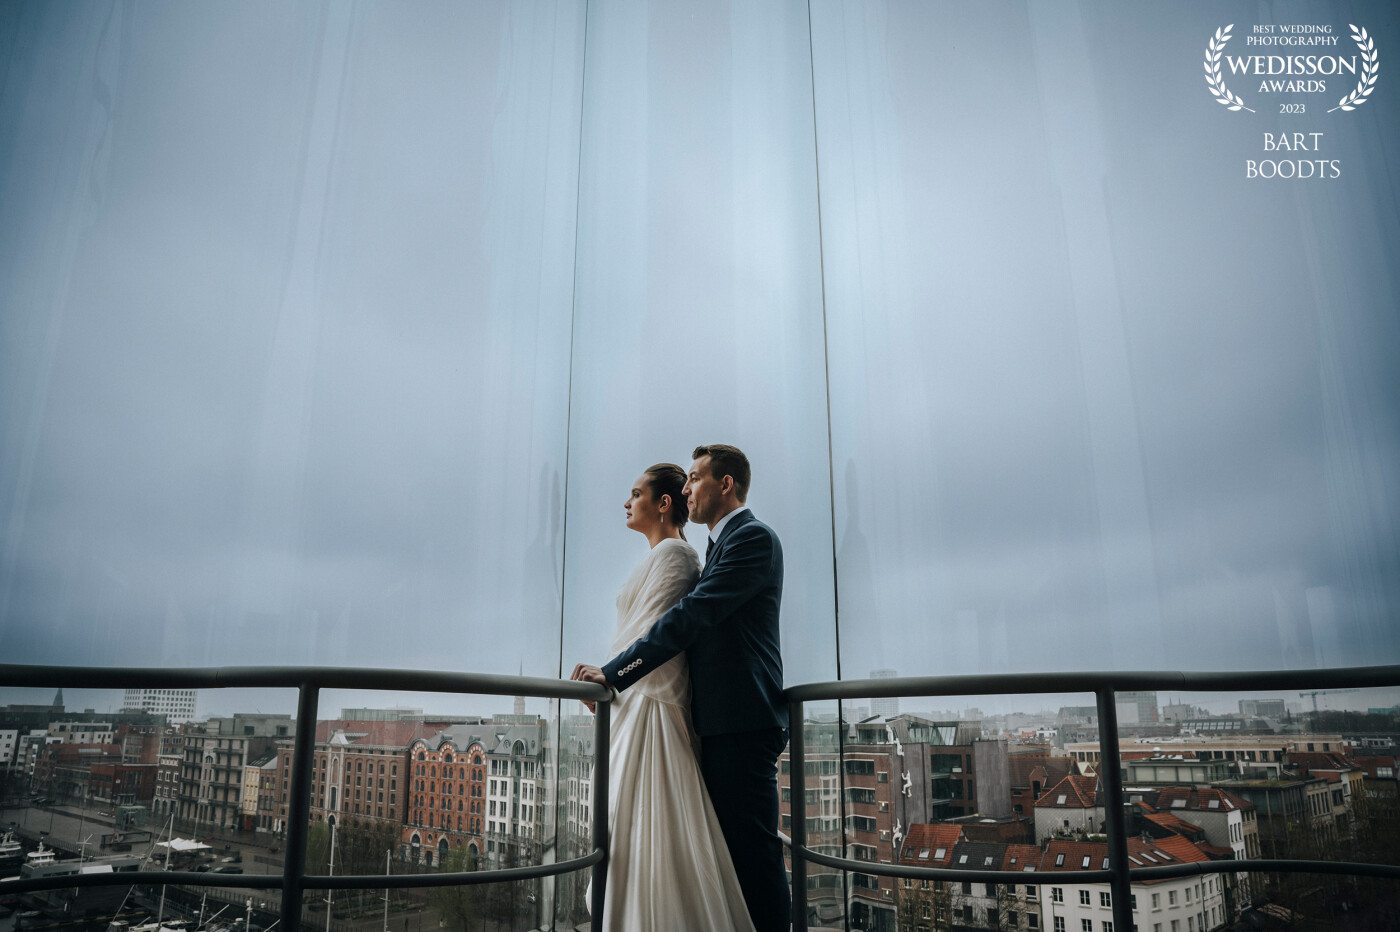 On a cloudy day, this couple celebrated their love. We used the very beautiful MAS-building of Antwerp for this wonderful image